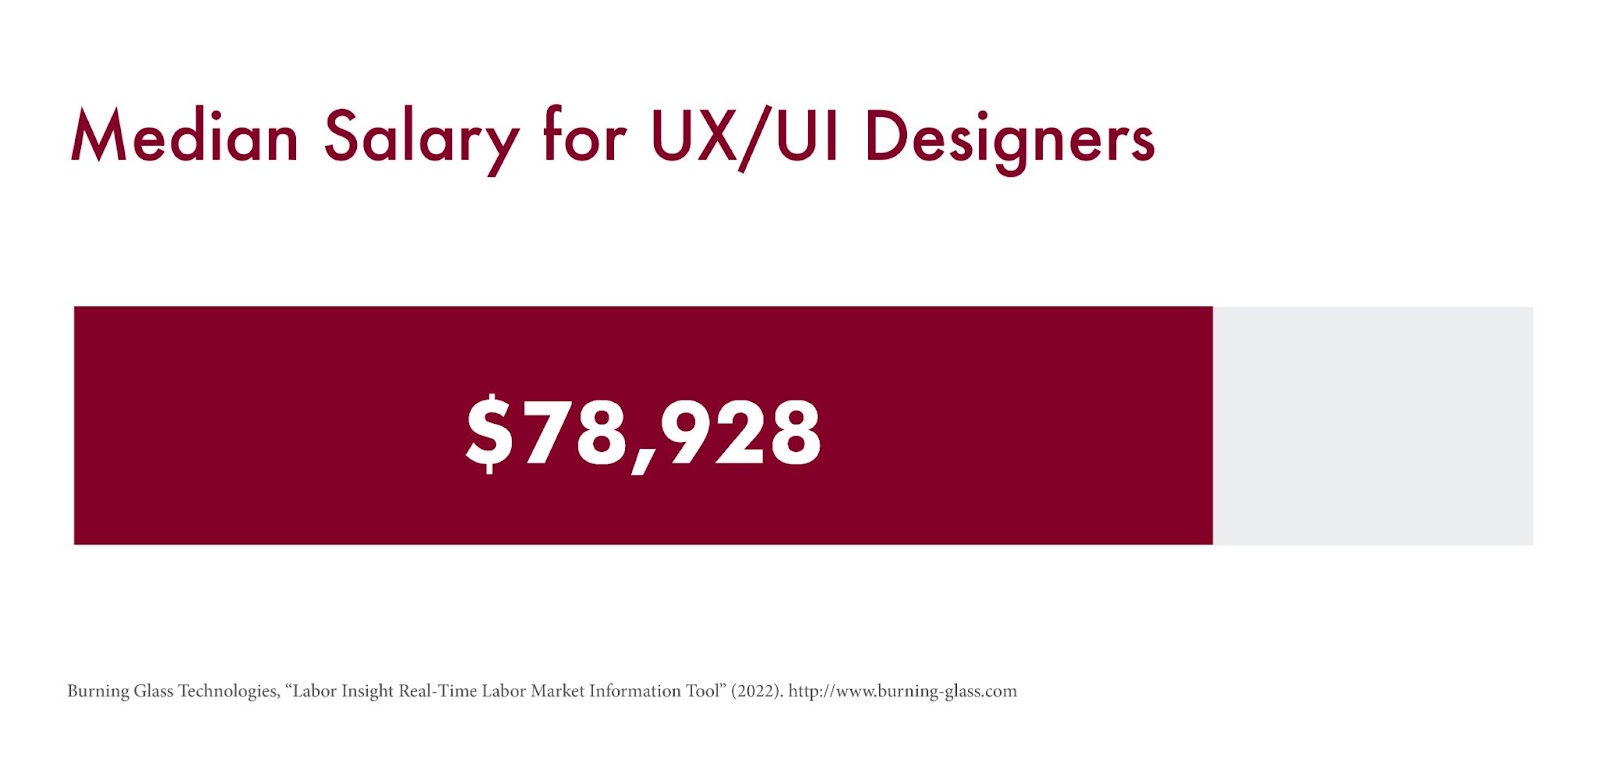 A chart that shows the median salary for UX/UI designers.